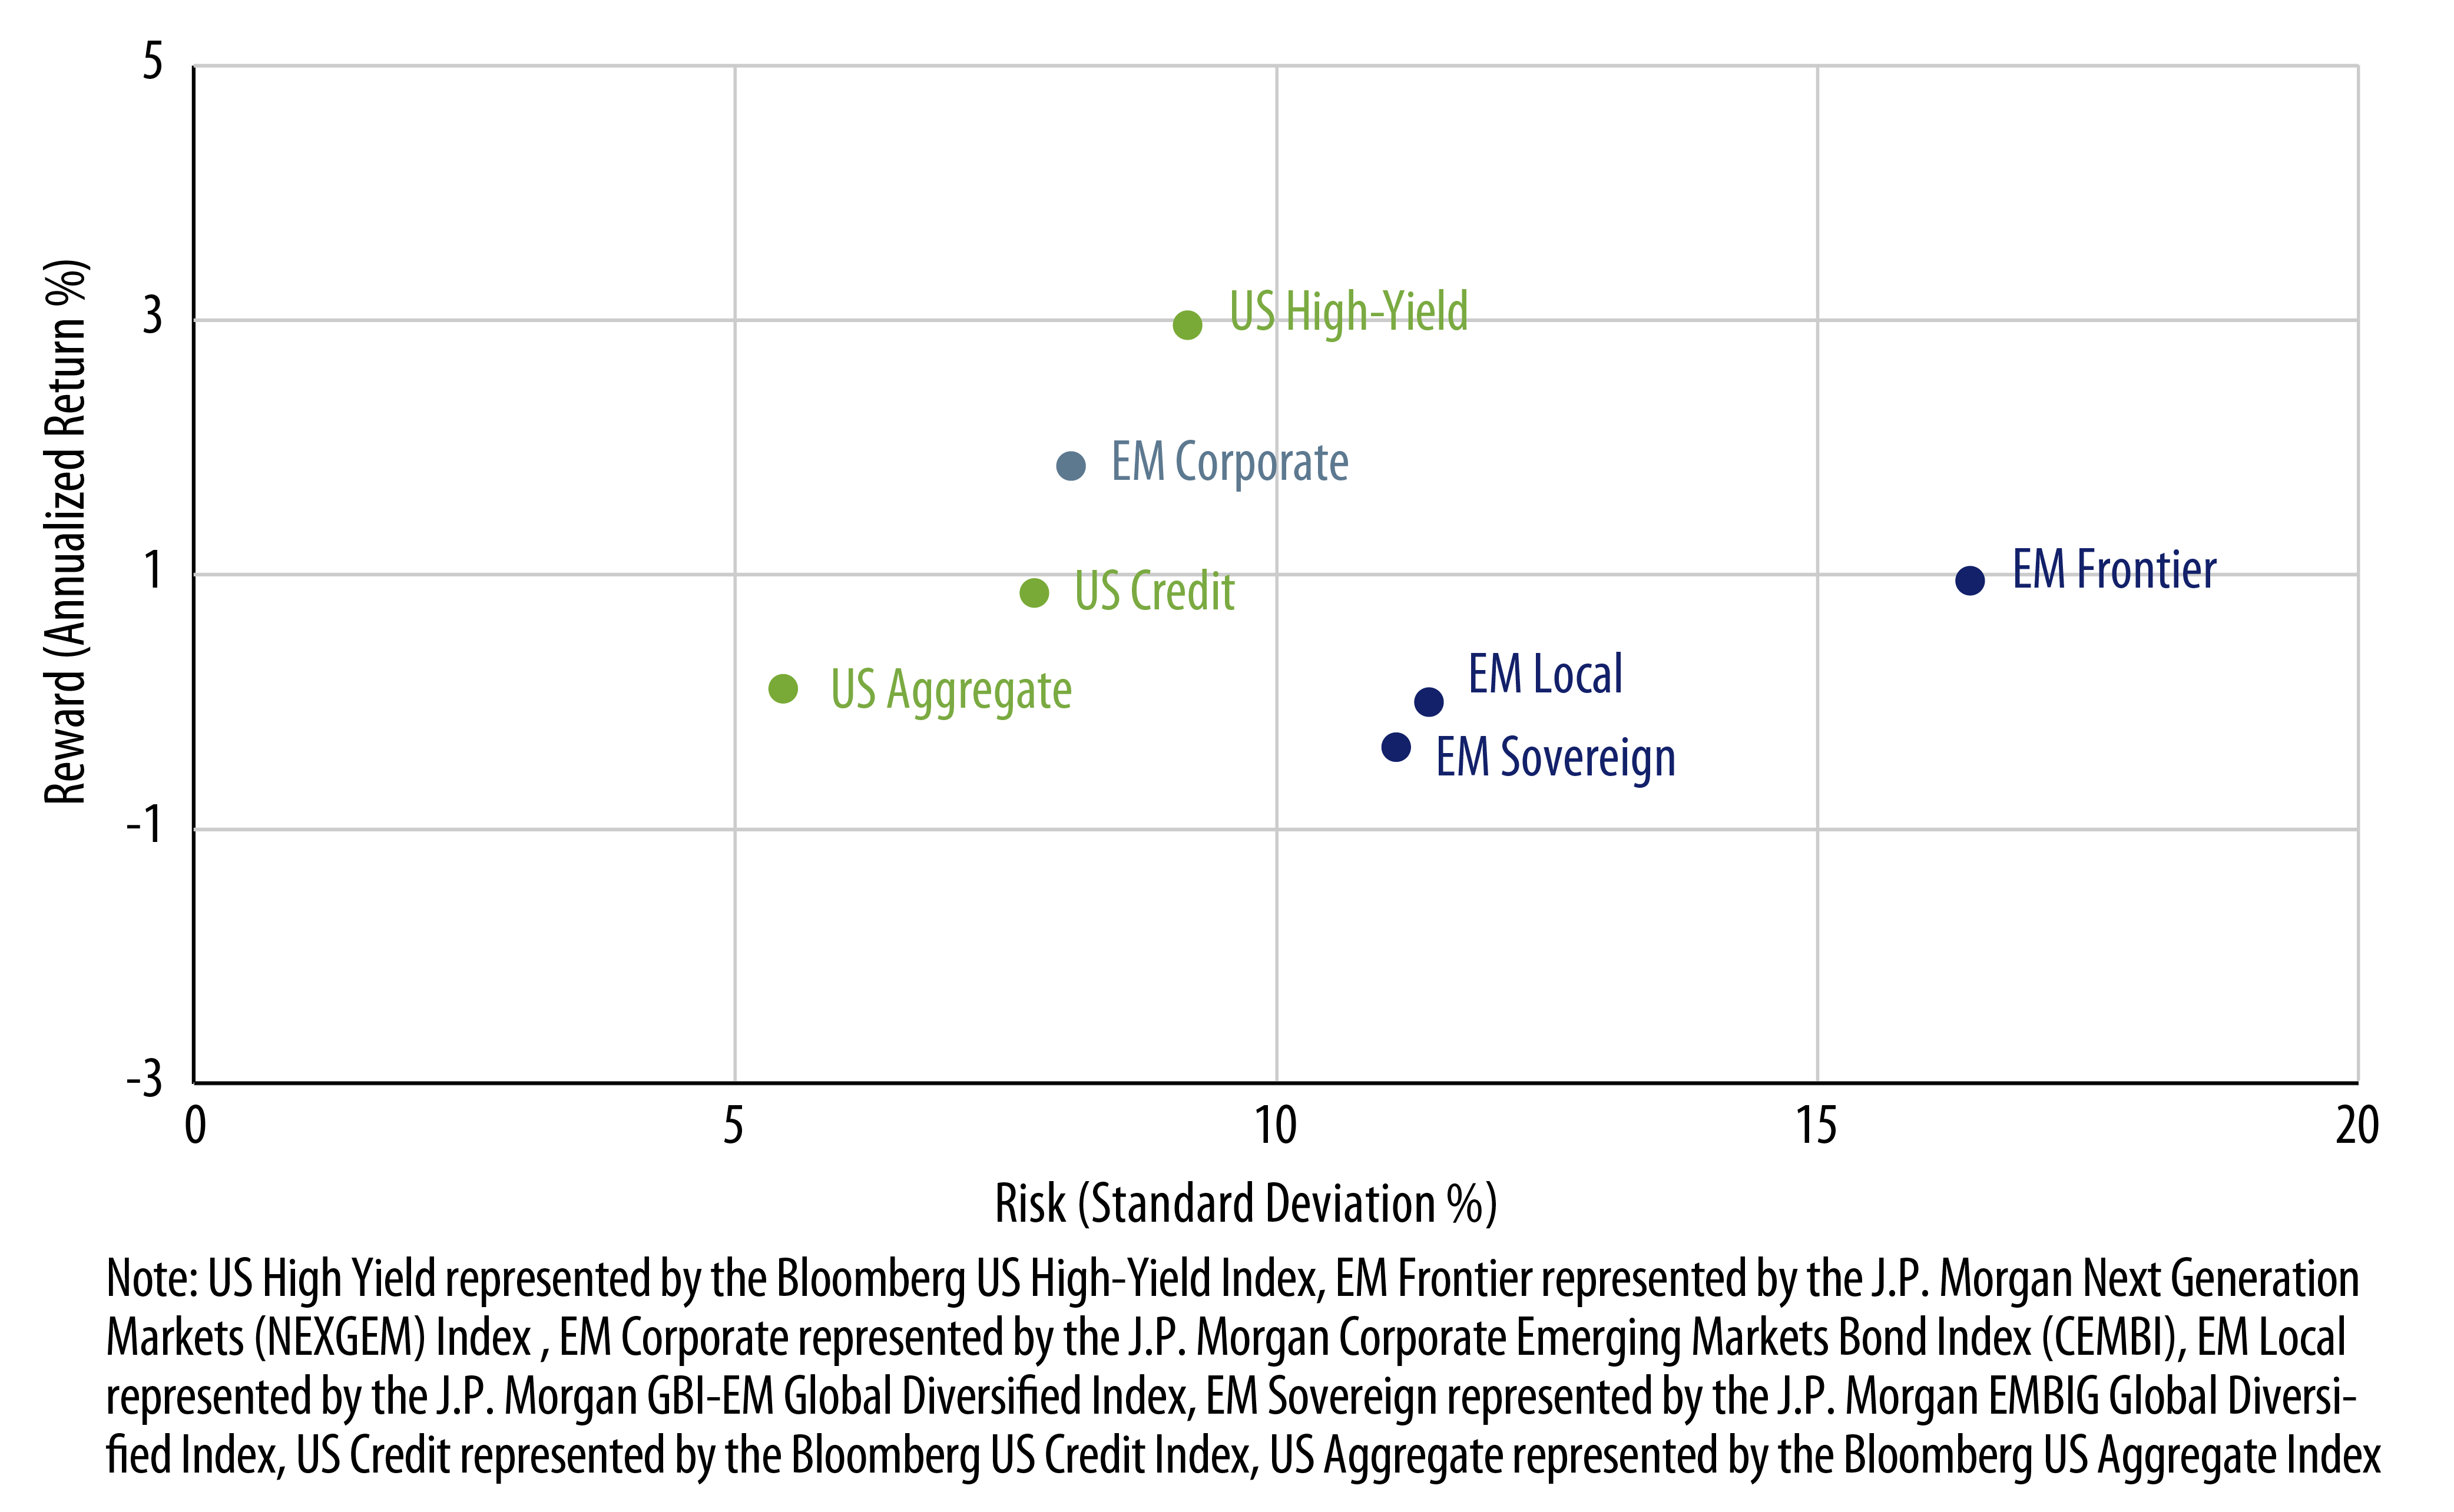 Explore EM Corporates Resilient in the Face of Headwinds—5-Year Risk/Reward Comparison